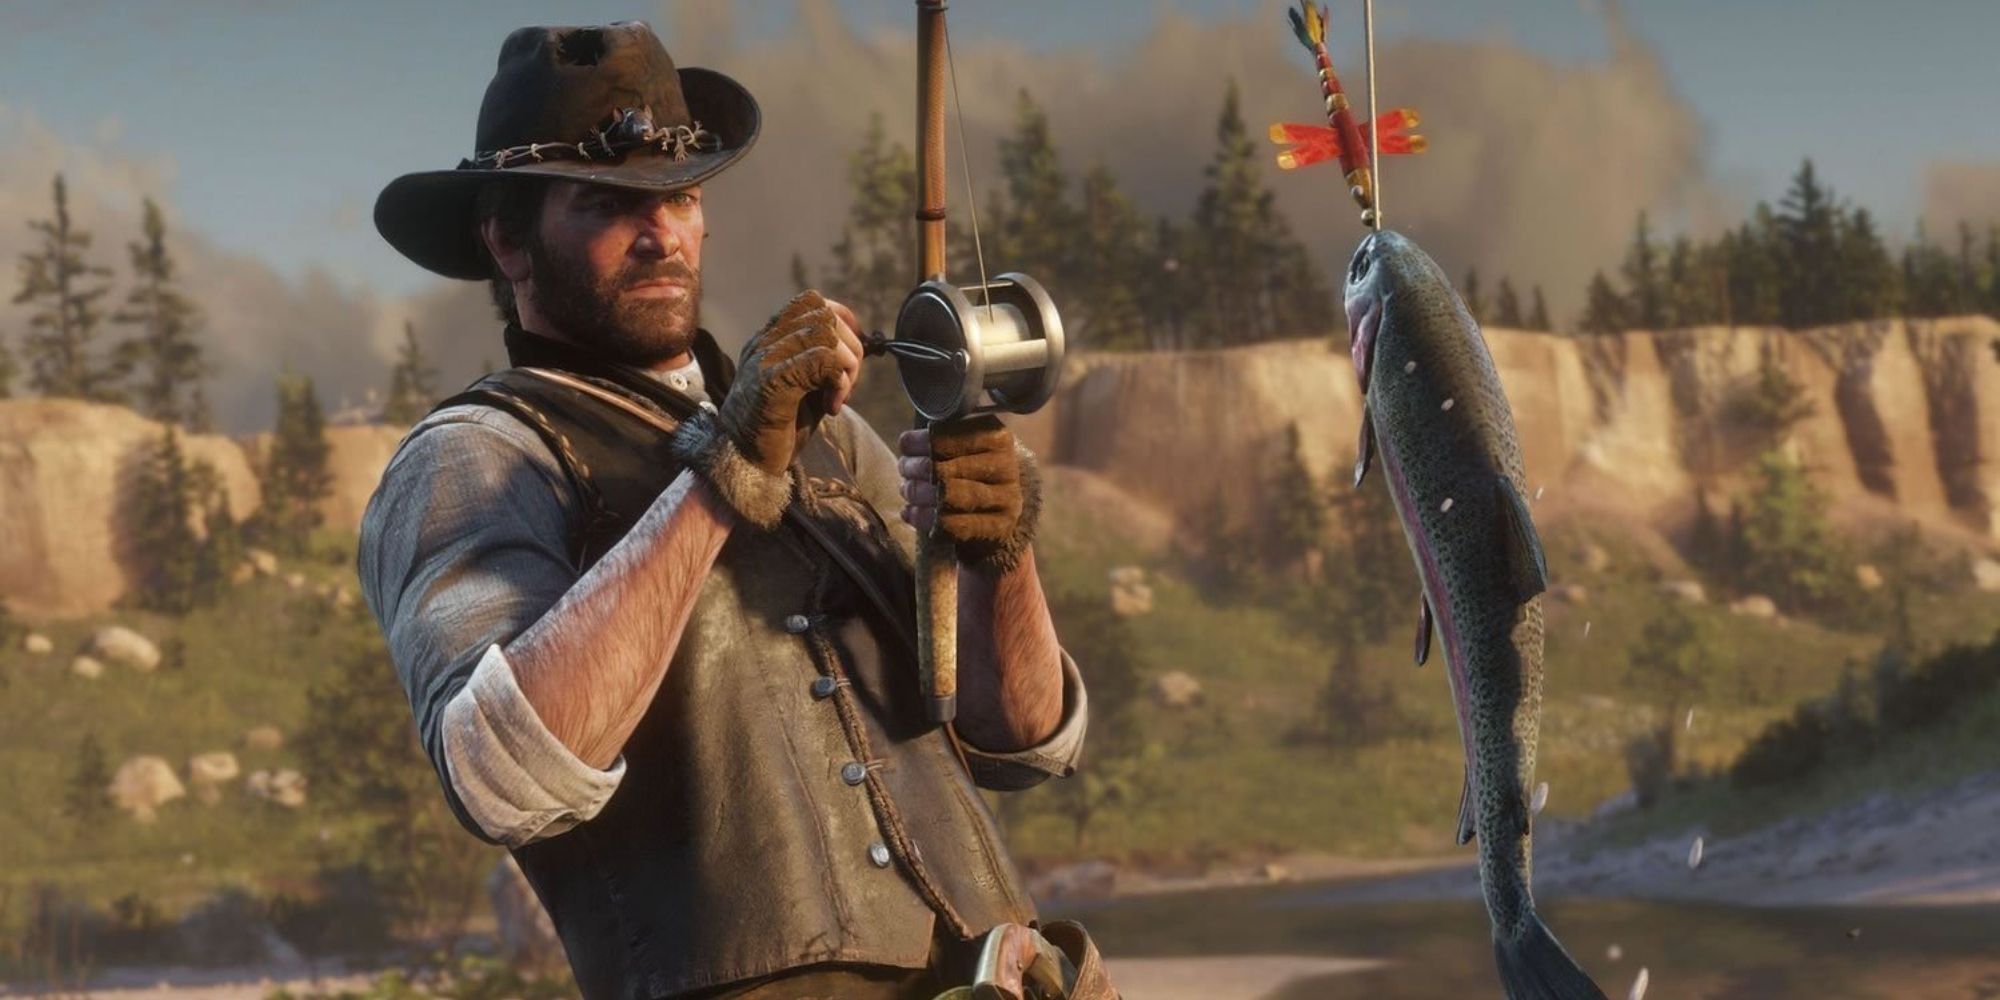 An image of Arthur Morgan pulling up a large fish from a river in Red Dead Redemption 2